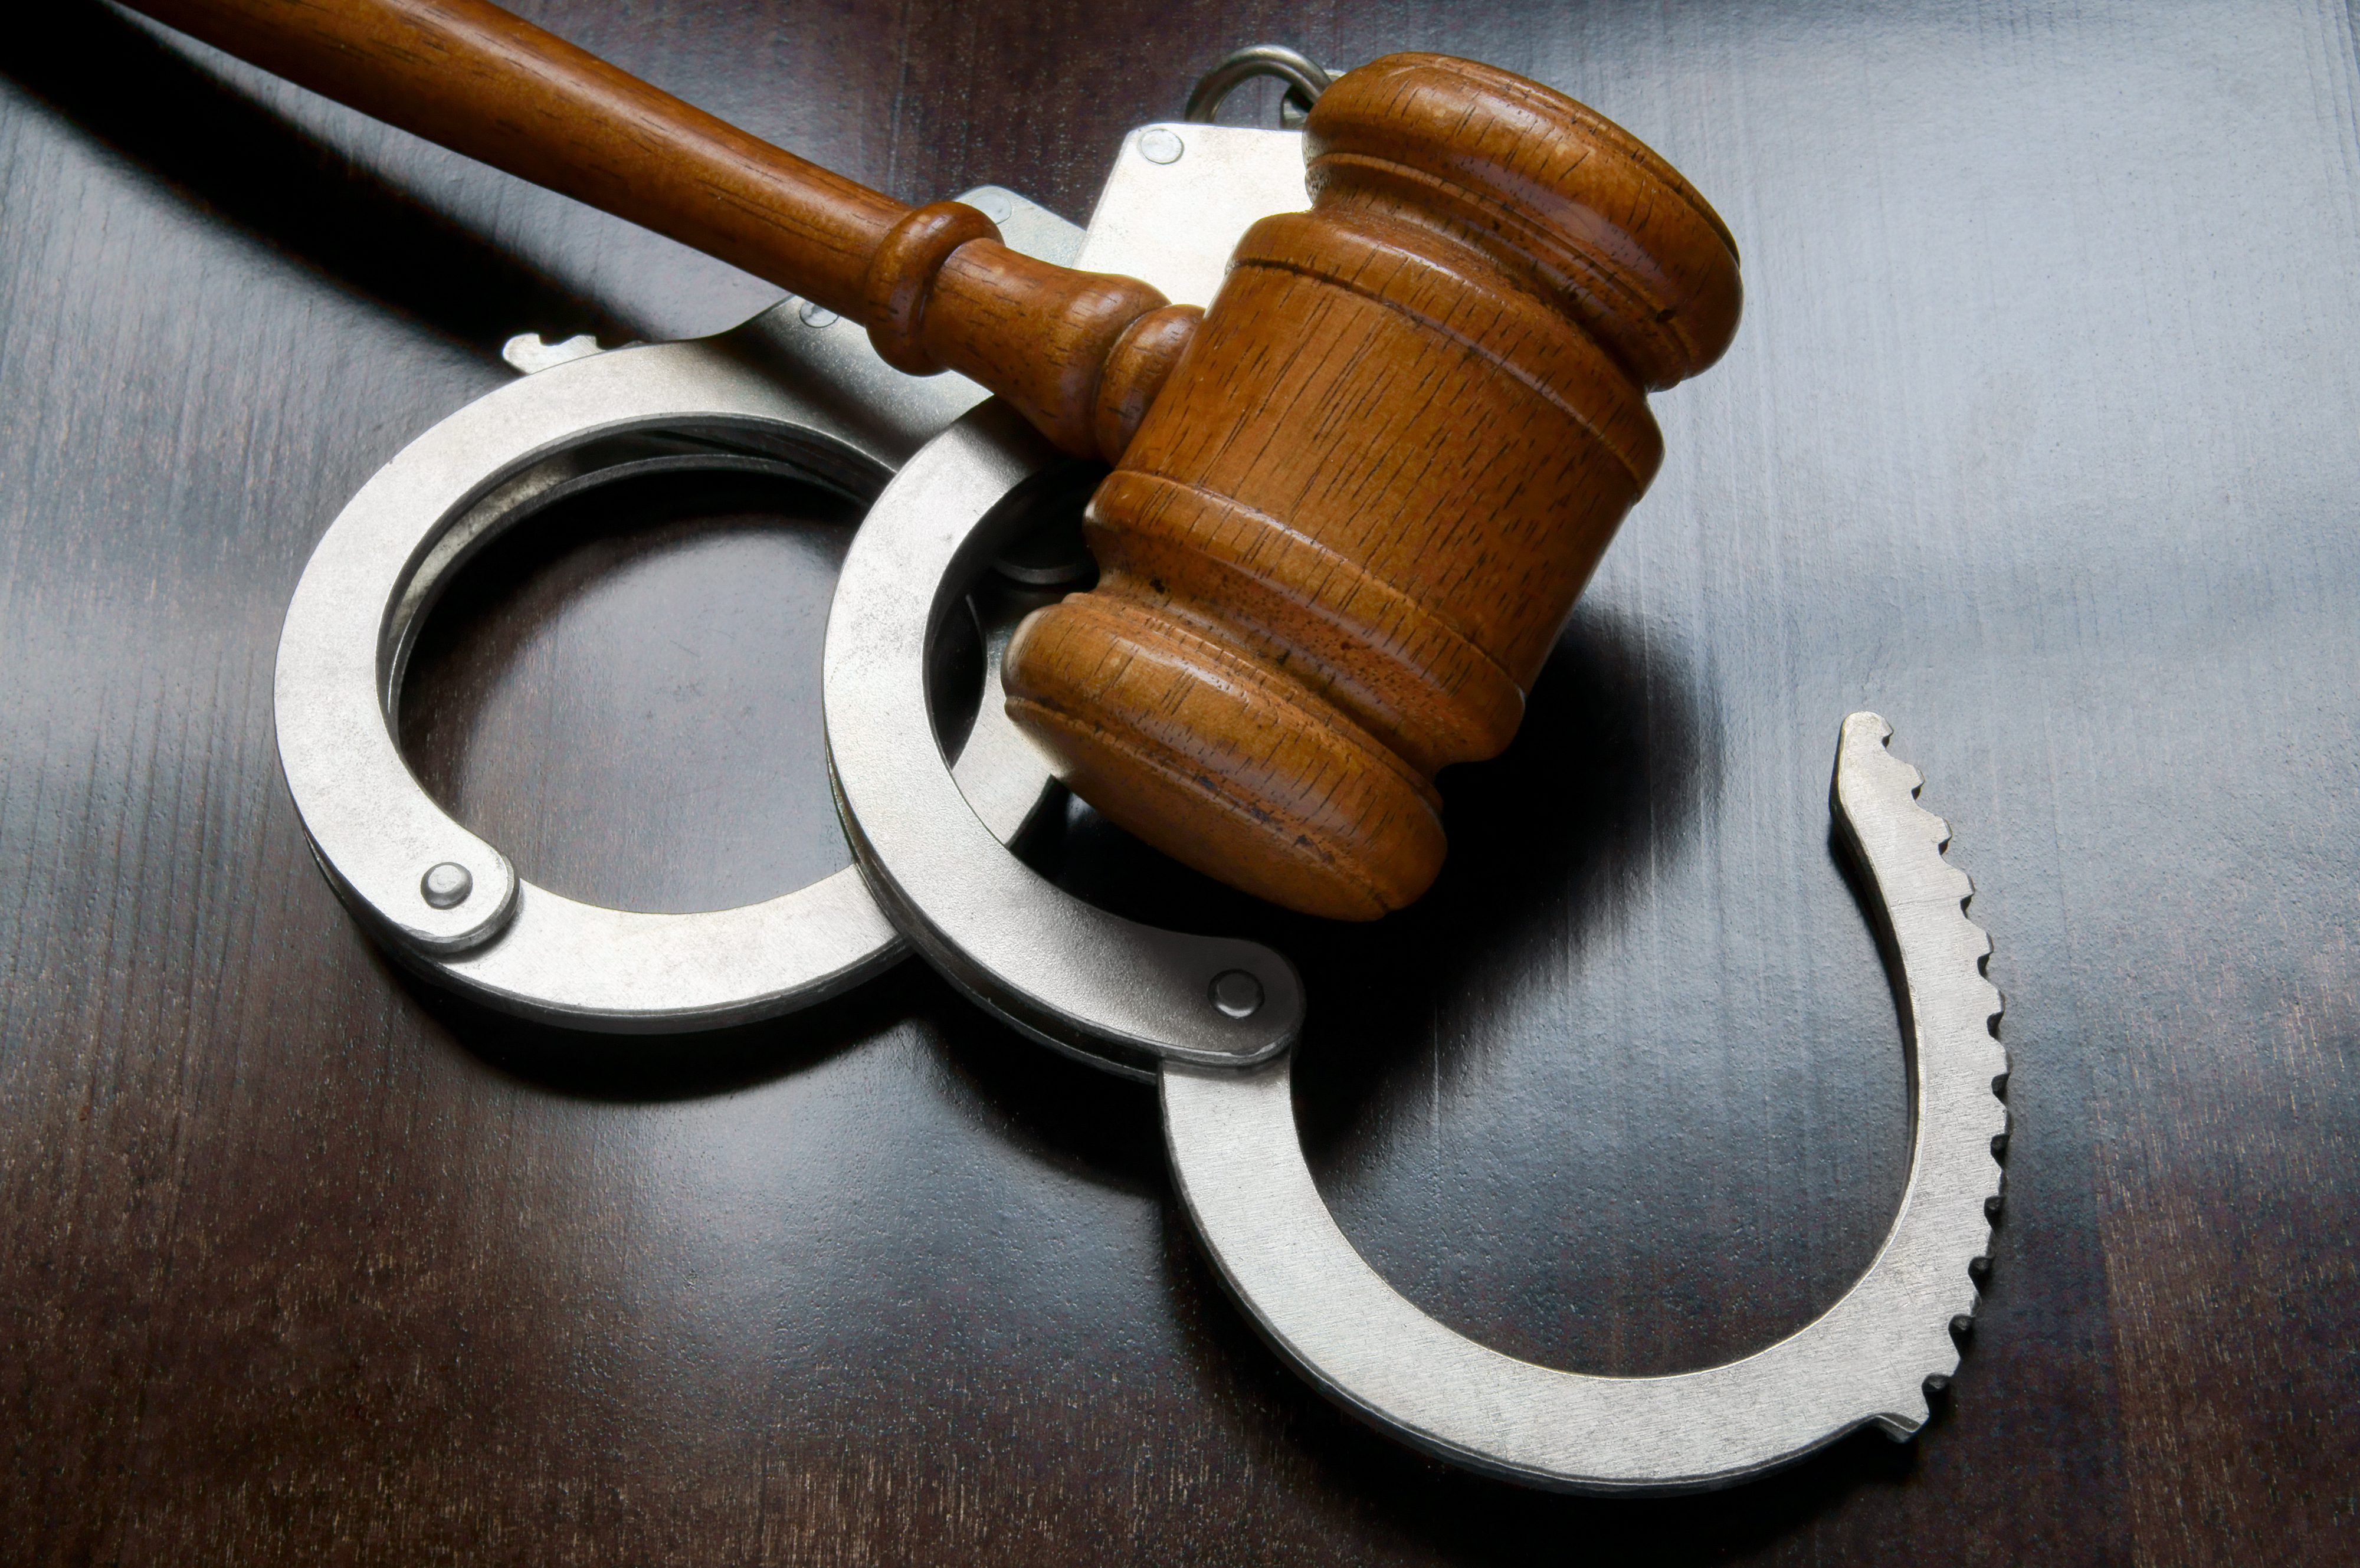 Gavel and handcuffs - New York extortion law